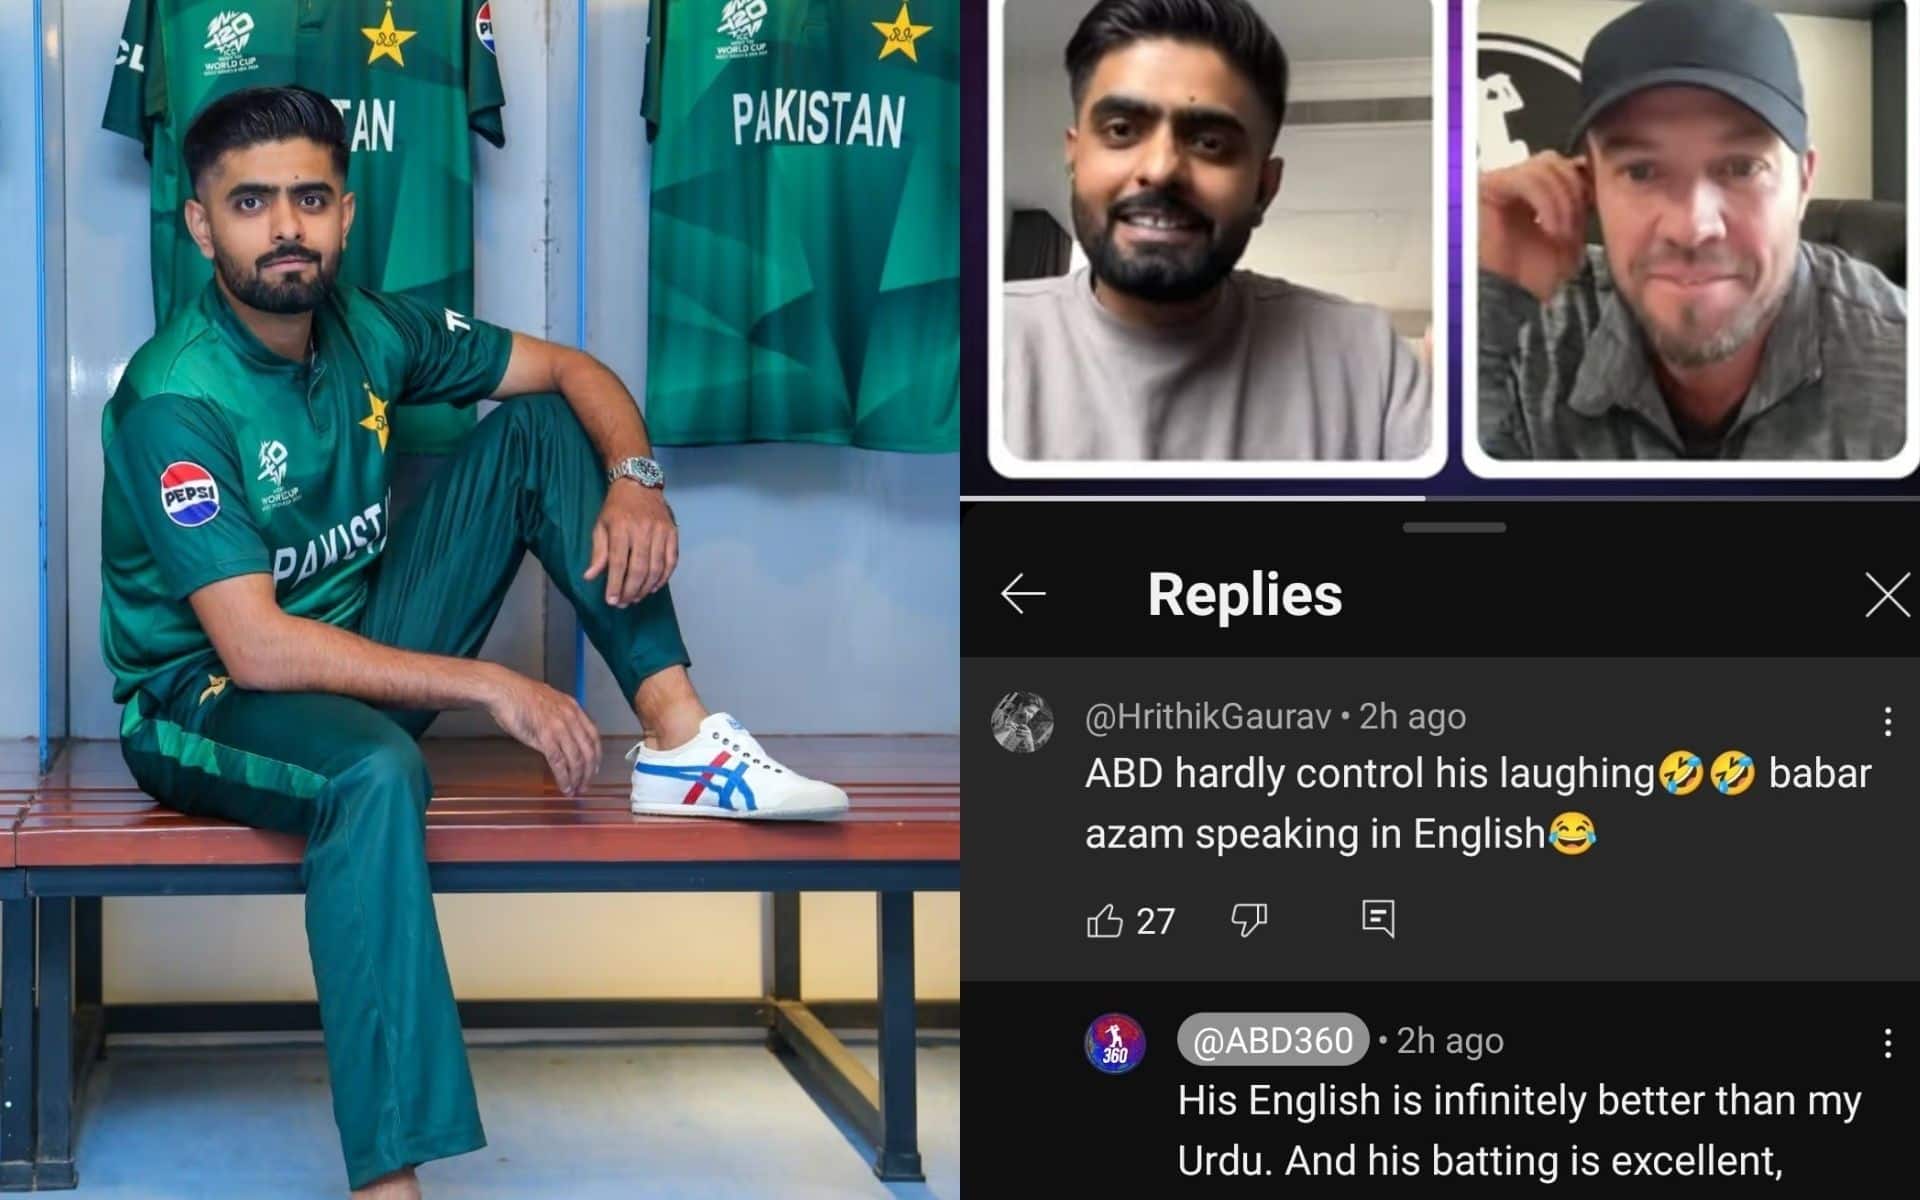 AB de Villiers steps up to stop Babar Azam's troll for language (X.com)